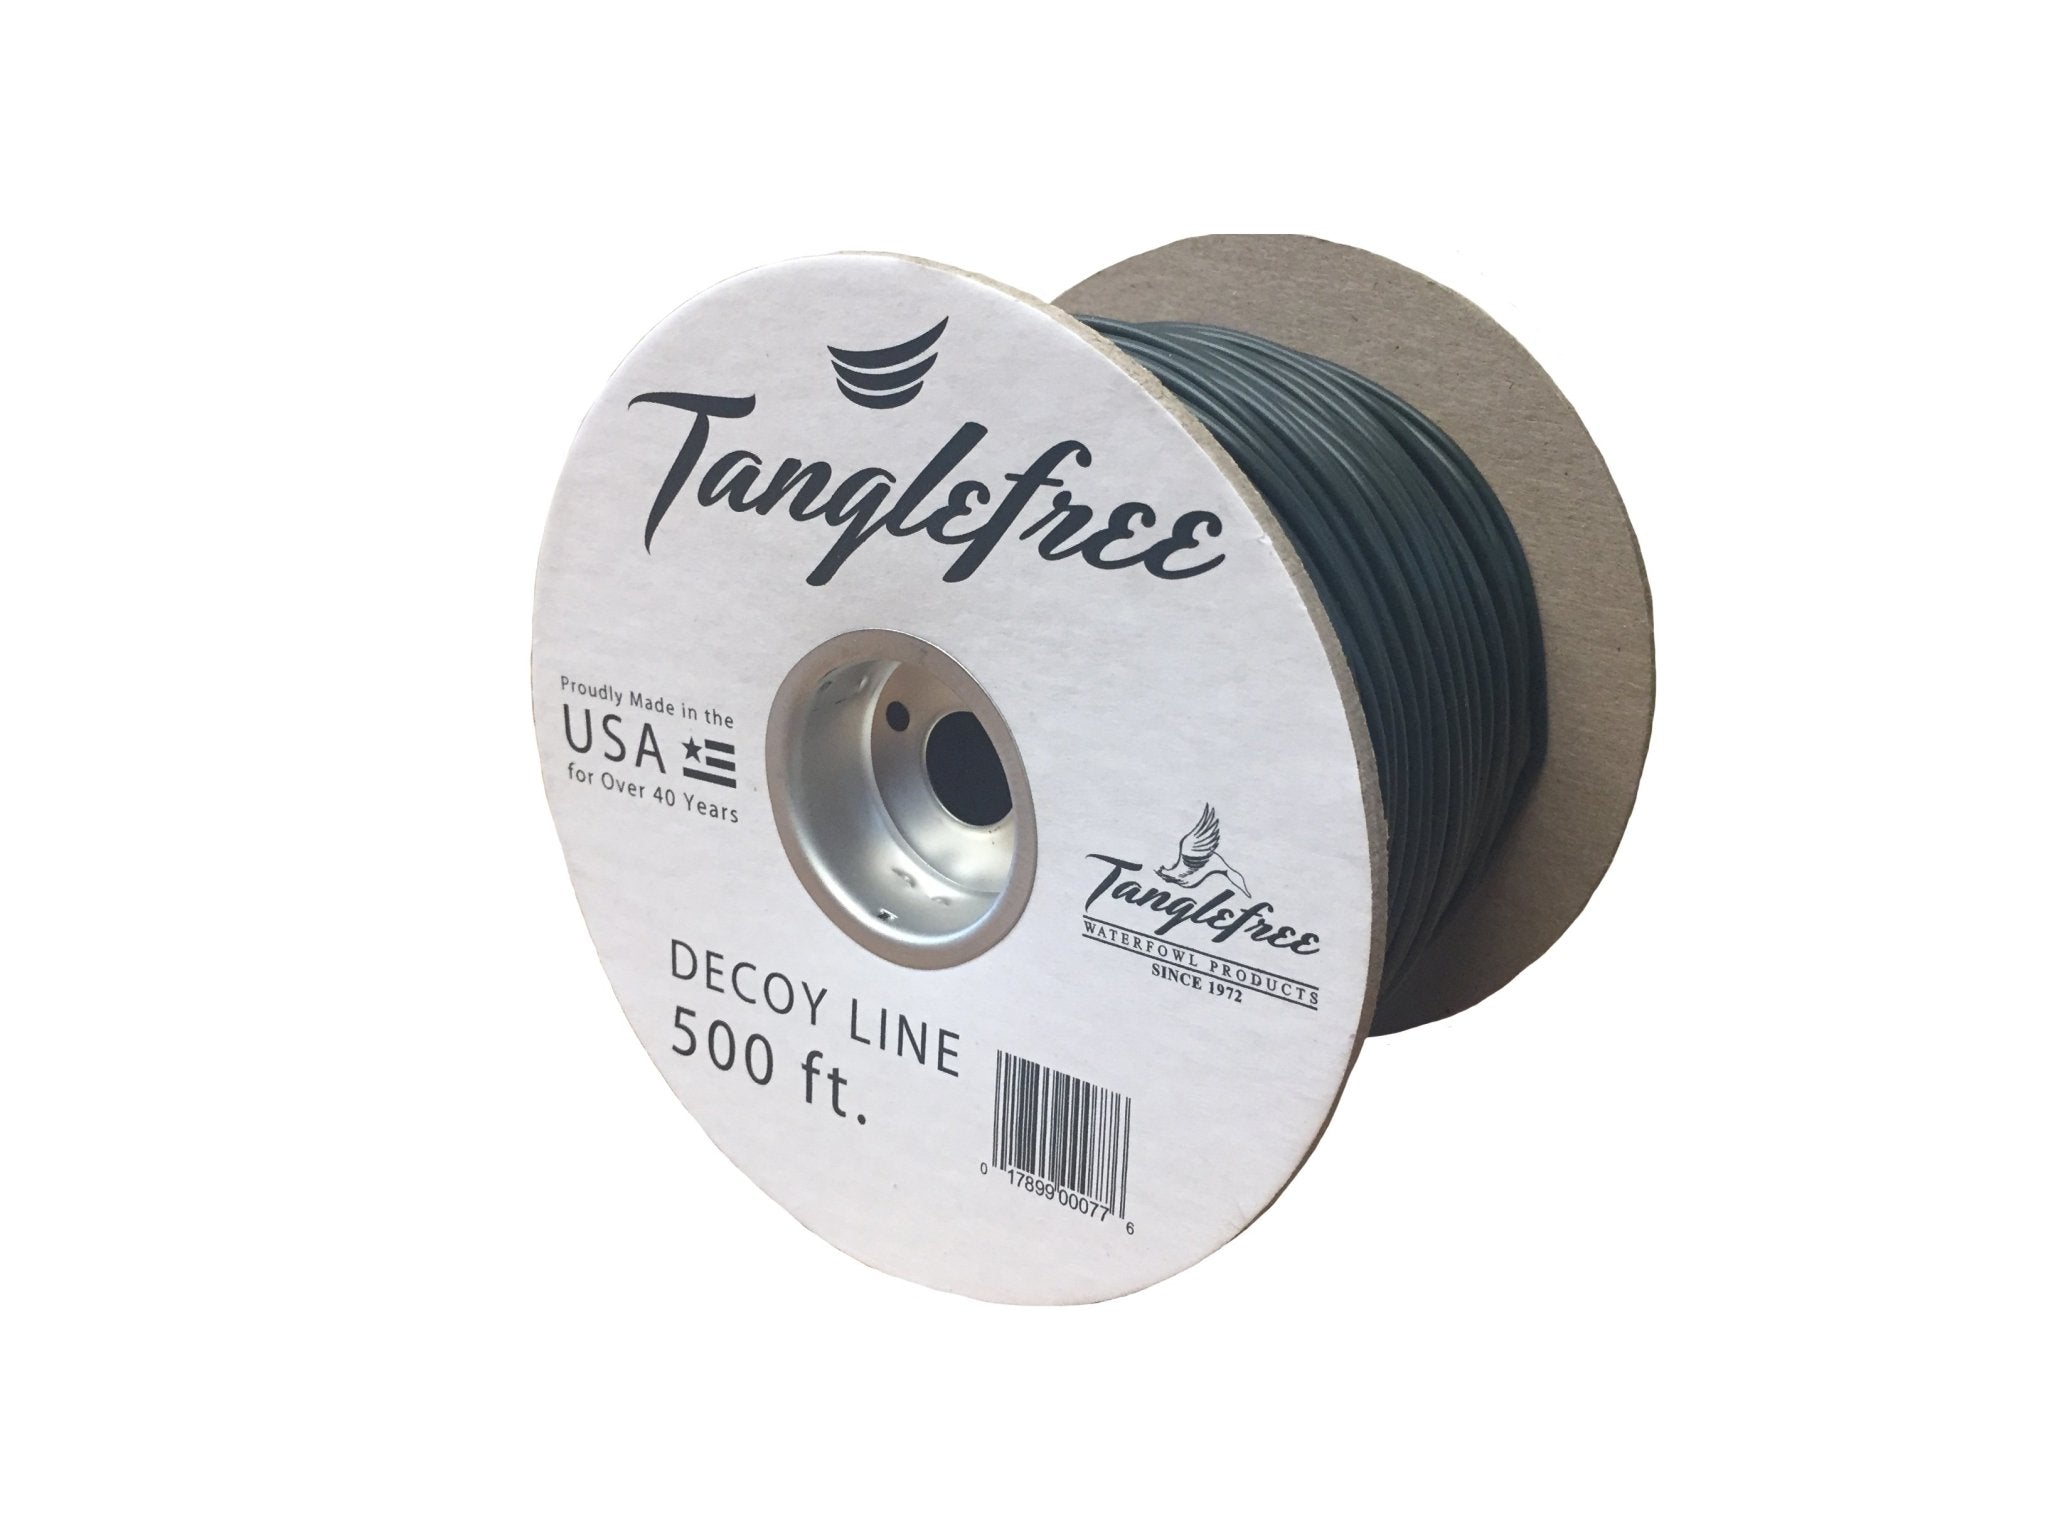 Tanglefree Decoy Line 500ft - Pacific Flyway Supplies